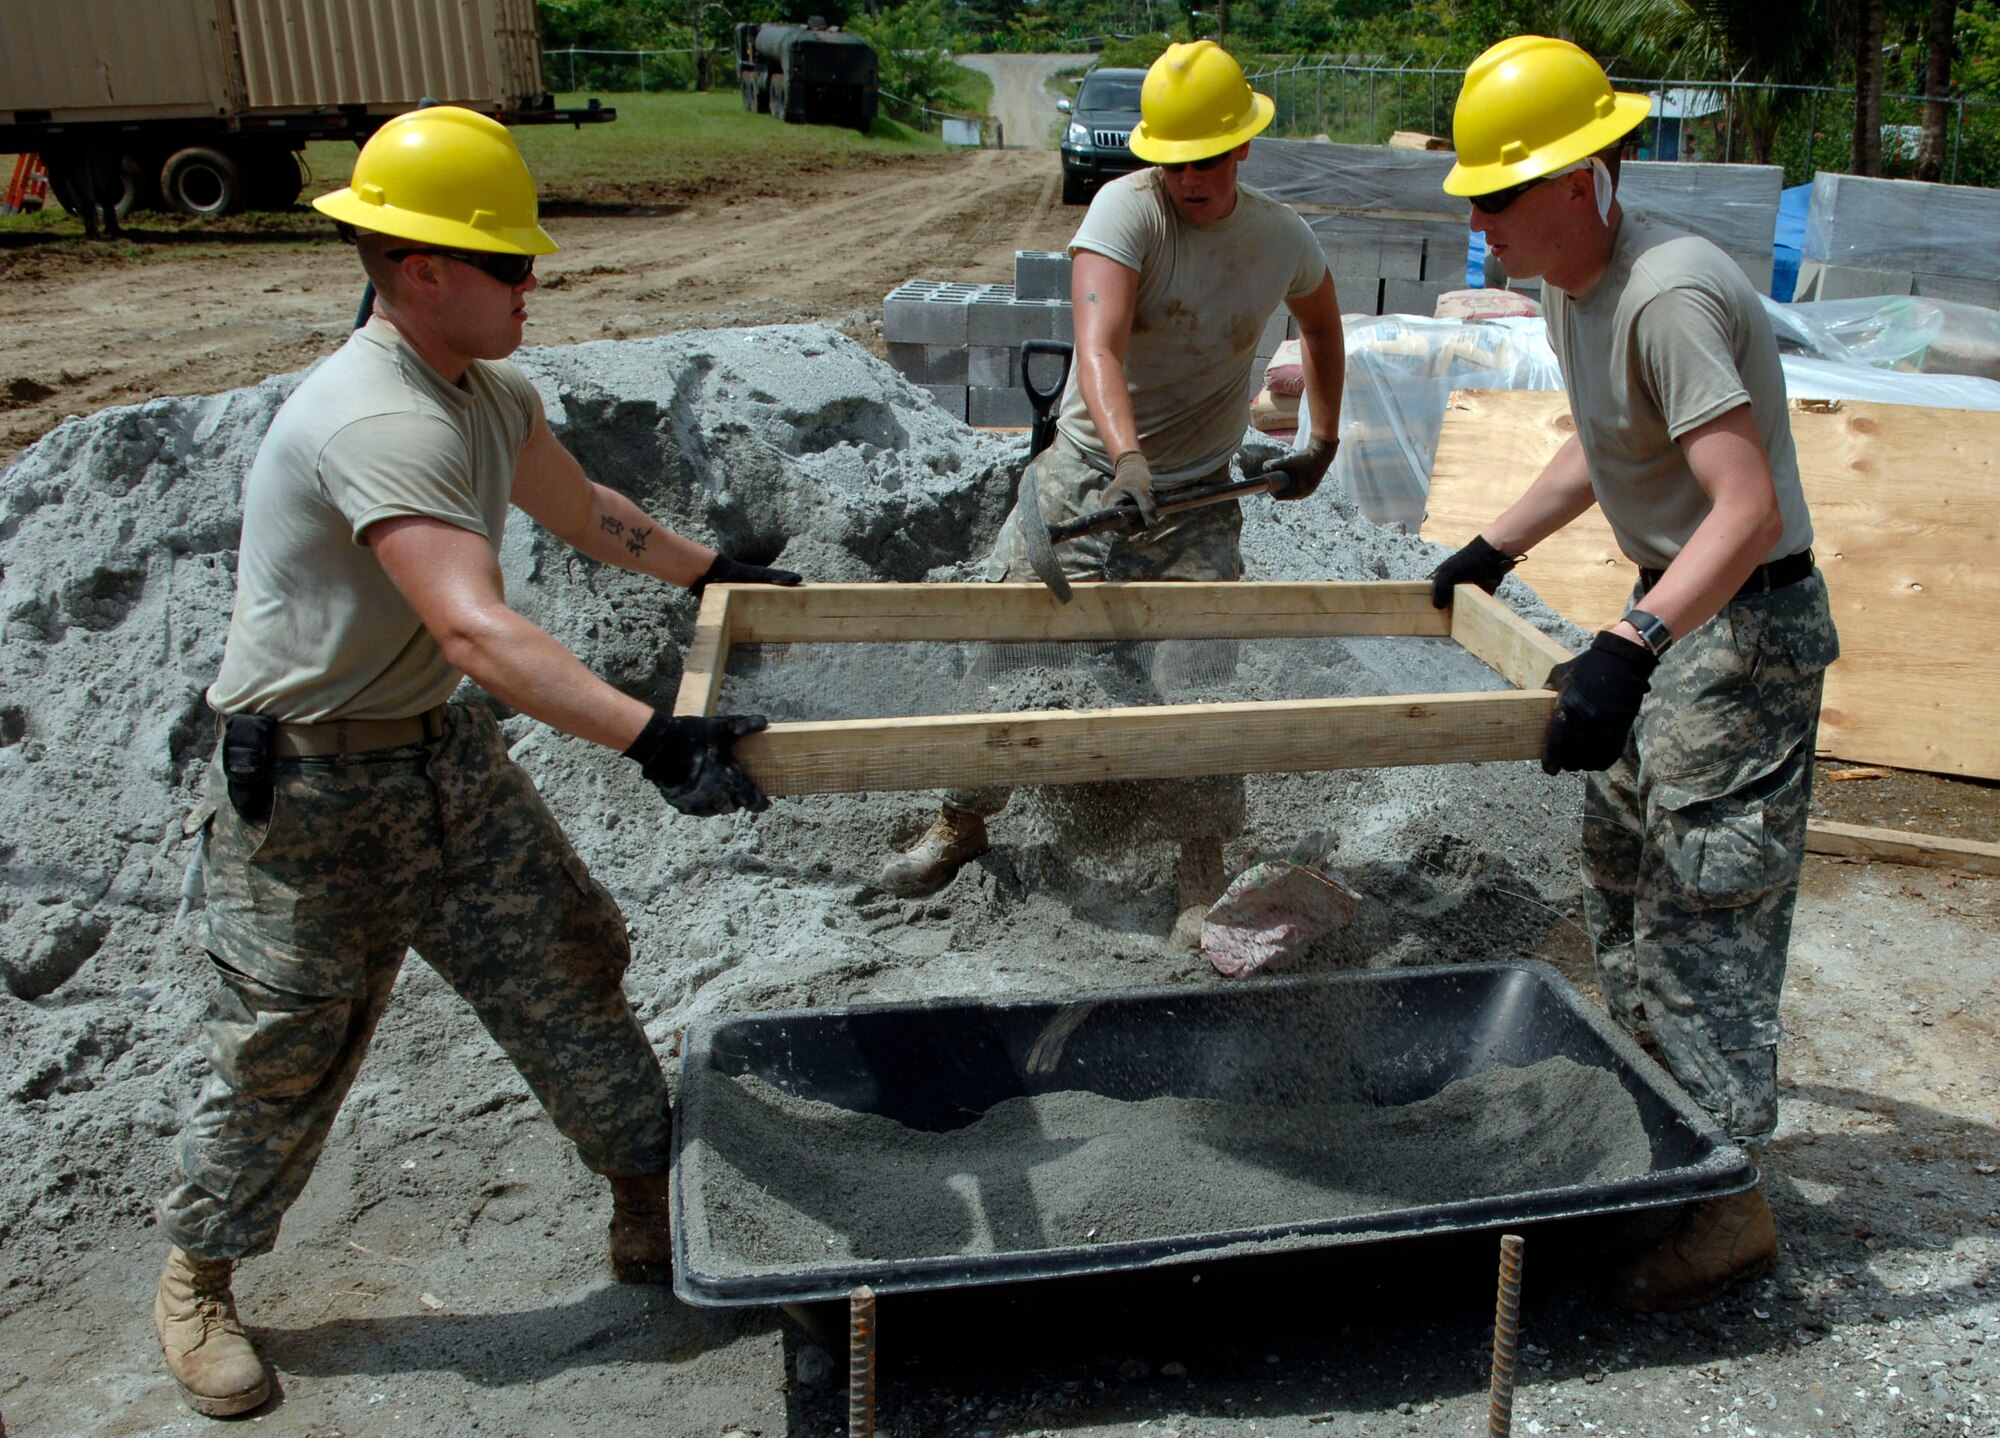 Pfc. Abel Scott (from left to right), Pfc. Wayne Paliwoda, and Pvt. Michael Culver, construction engineers with the 372nd Engineer Company, sift material to make concrete June 26 at Santa Librada elementary school in Panama. The Army Reservists are deployed in support of New Horizons Panama 2010, a humanitarian assistance mission designed to strengthen partnerships between the United States and Panama. (U.S. Air Force photo/Tech. Sgt. Eric Petosky)